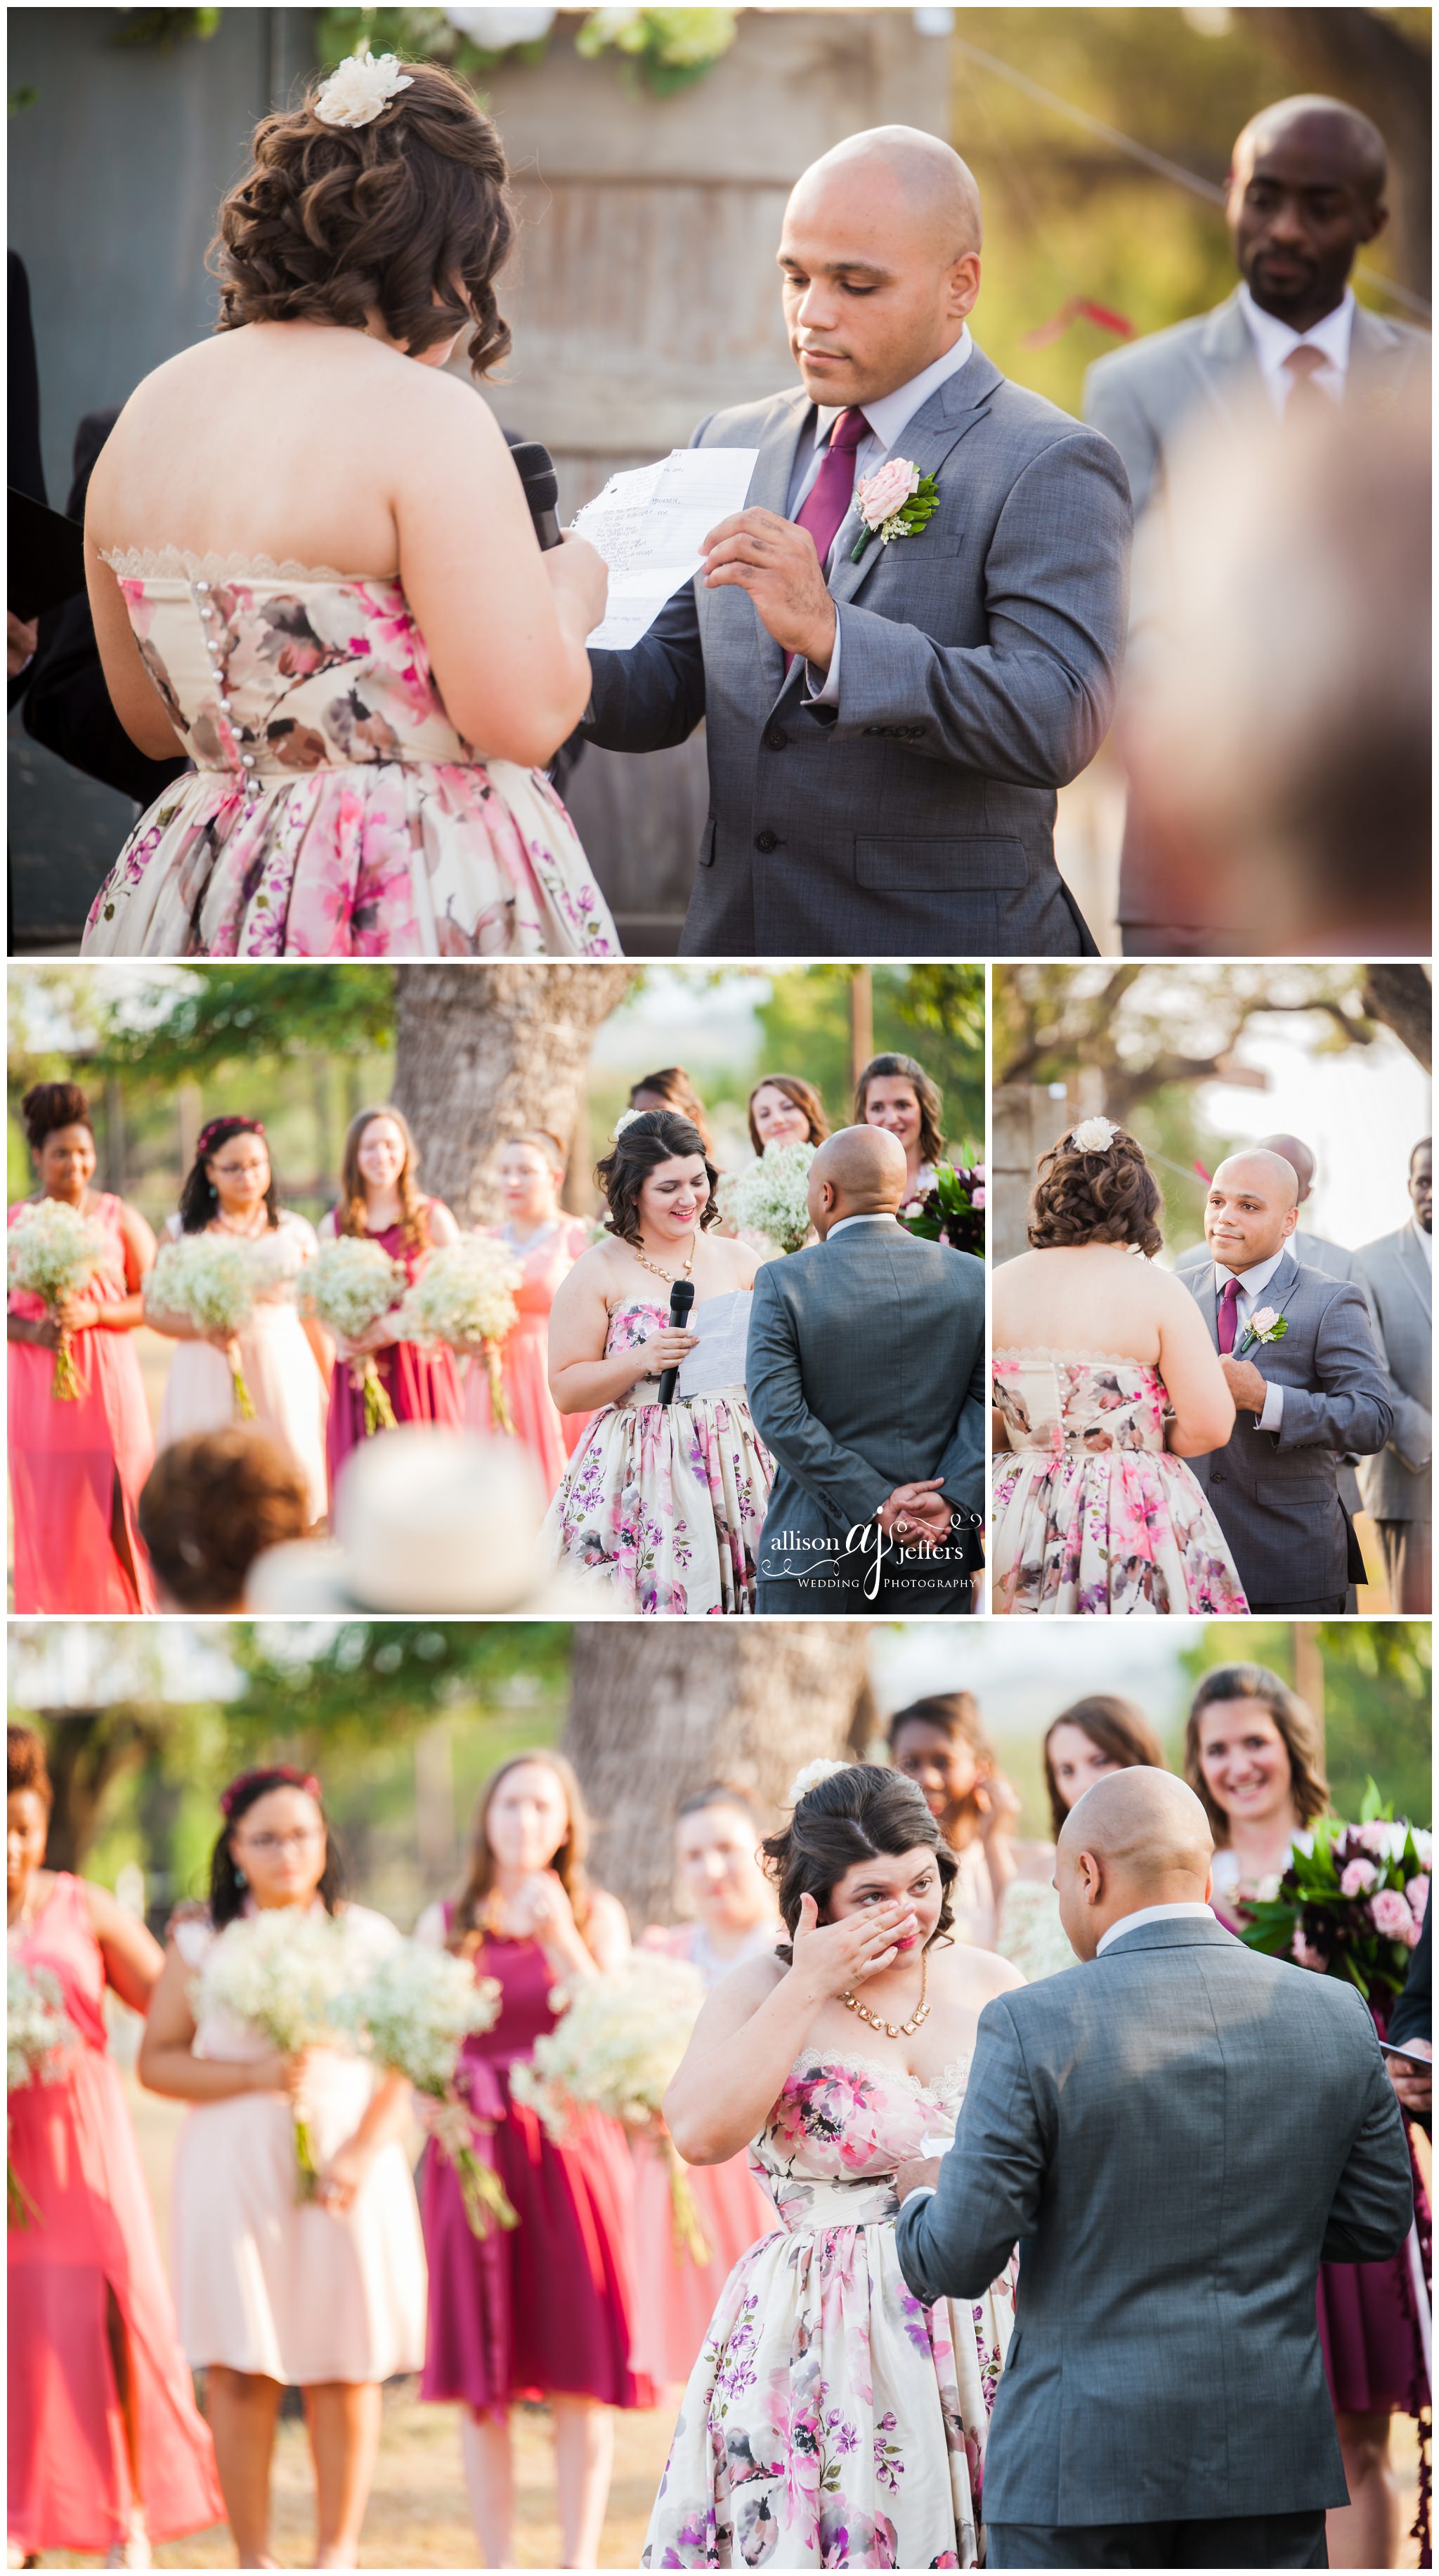 Kerrville Wedding Photographer Unique fun wedding with floral dress 0038